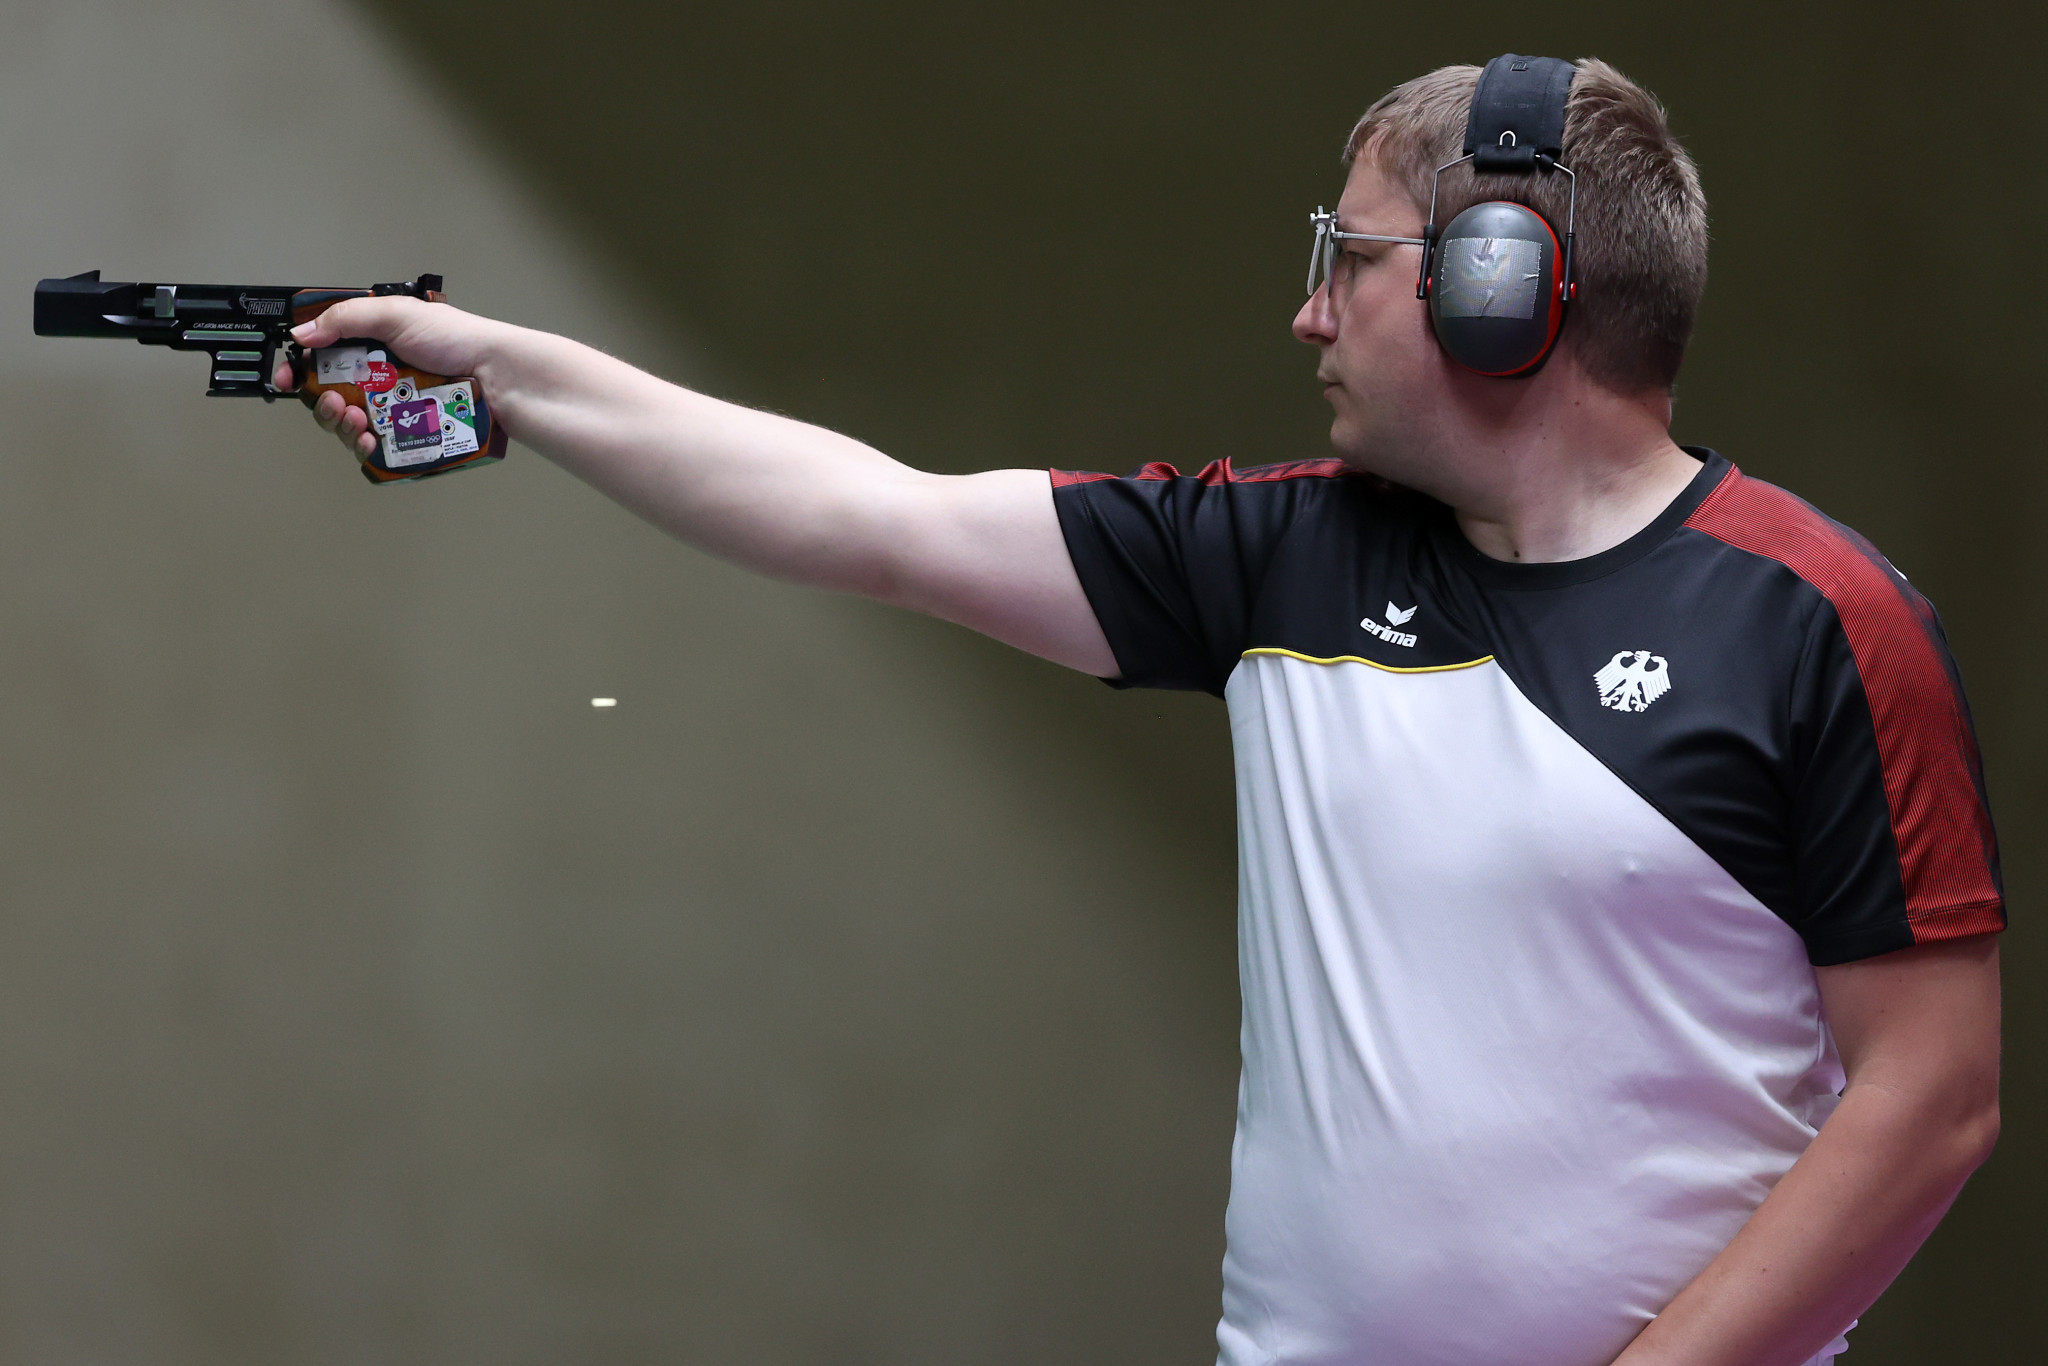 Reitz takes men's 25 metres rapid fire pistol title on penultimate day of ISSF World Cup in Rio